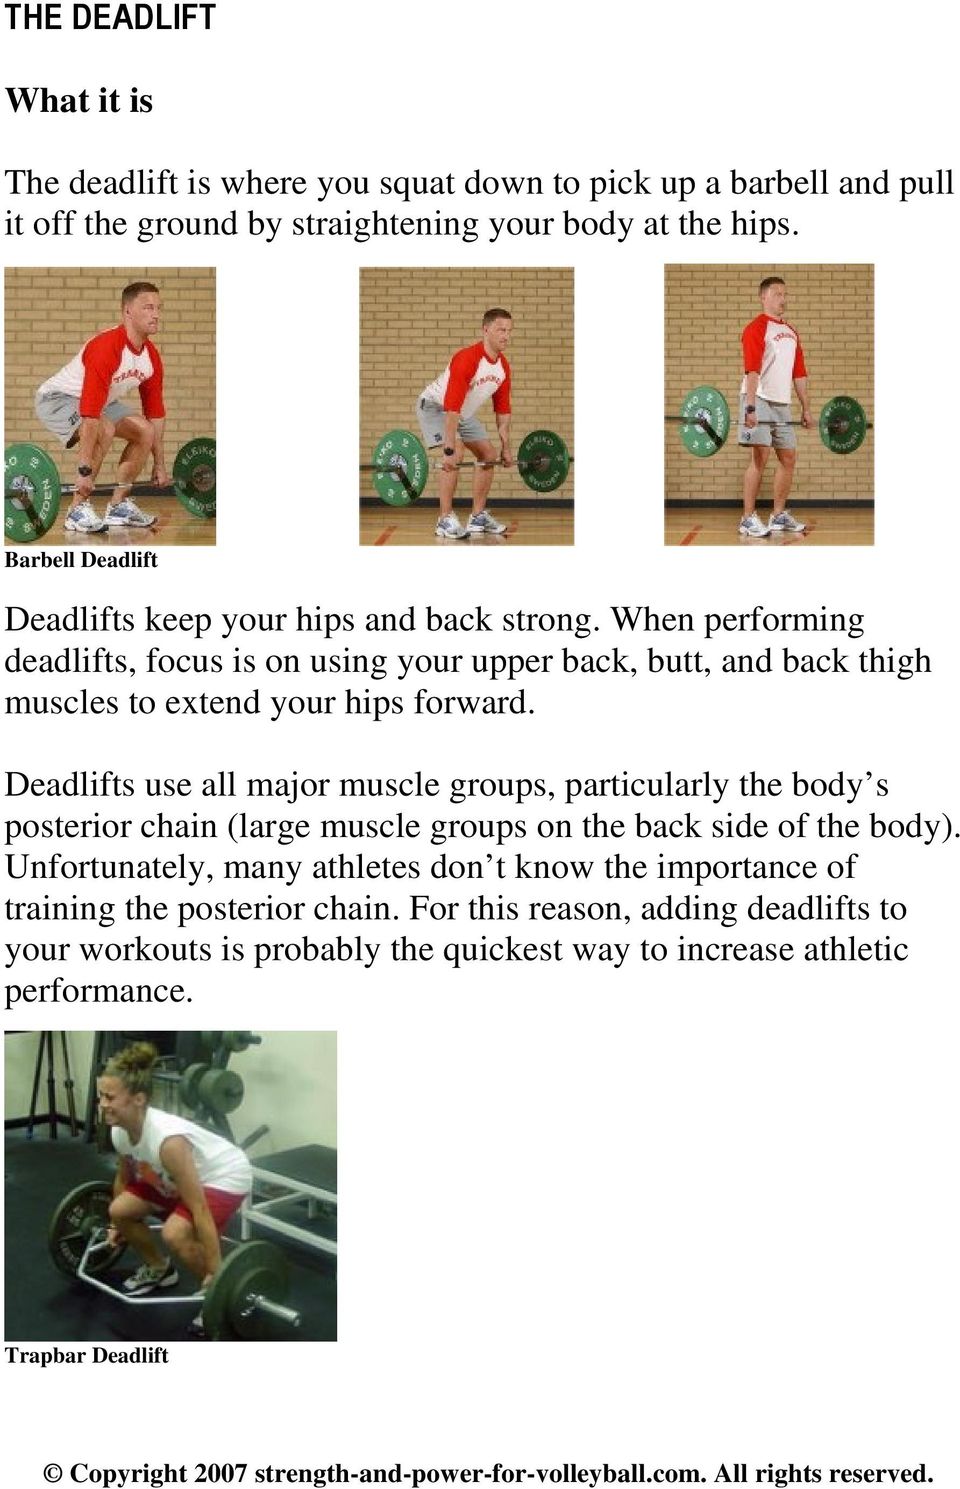 When performing deadlifts, focus is on using your upper back, butt, and back thigh muscles to extend your hips forward.